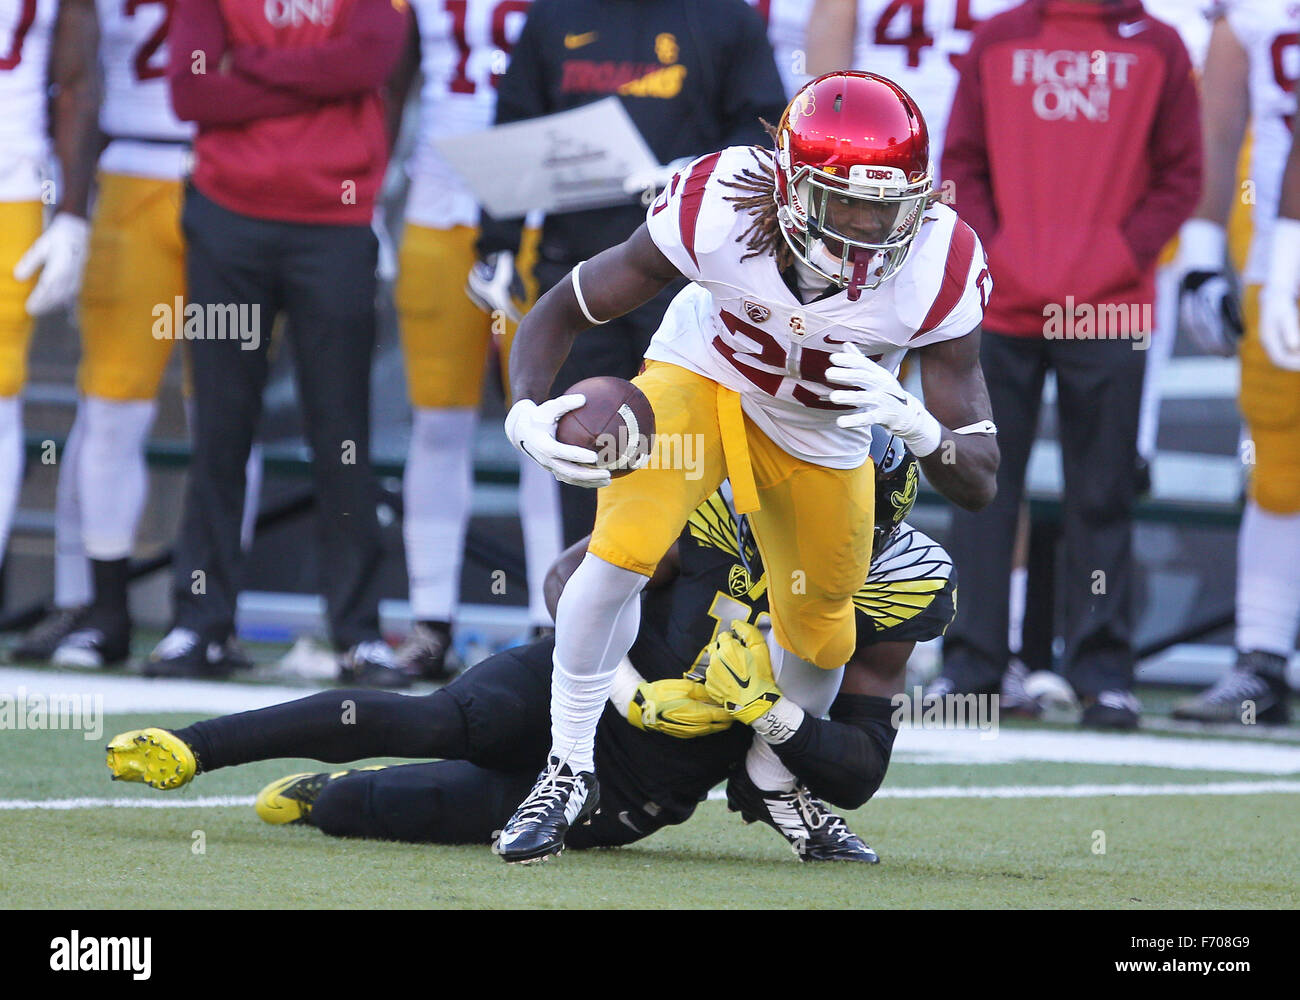 Autzen Stadium, Eugene, OR, USA. 21st Nov, 2015. USC running back Ronald Jones II (25) tries to slip away from an Oregon defender during the NCAA football game between the Ducks and the USC Trojans at Autzen Stadium, Eugene, OR. Larry C. Lawson/CSM/Alamy Live News Stock Photo